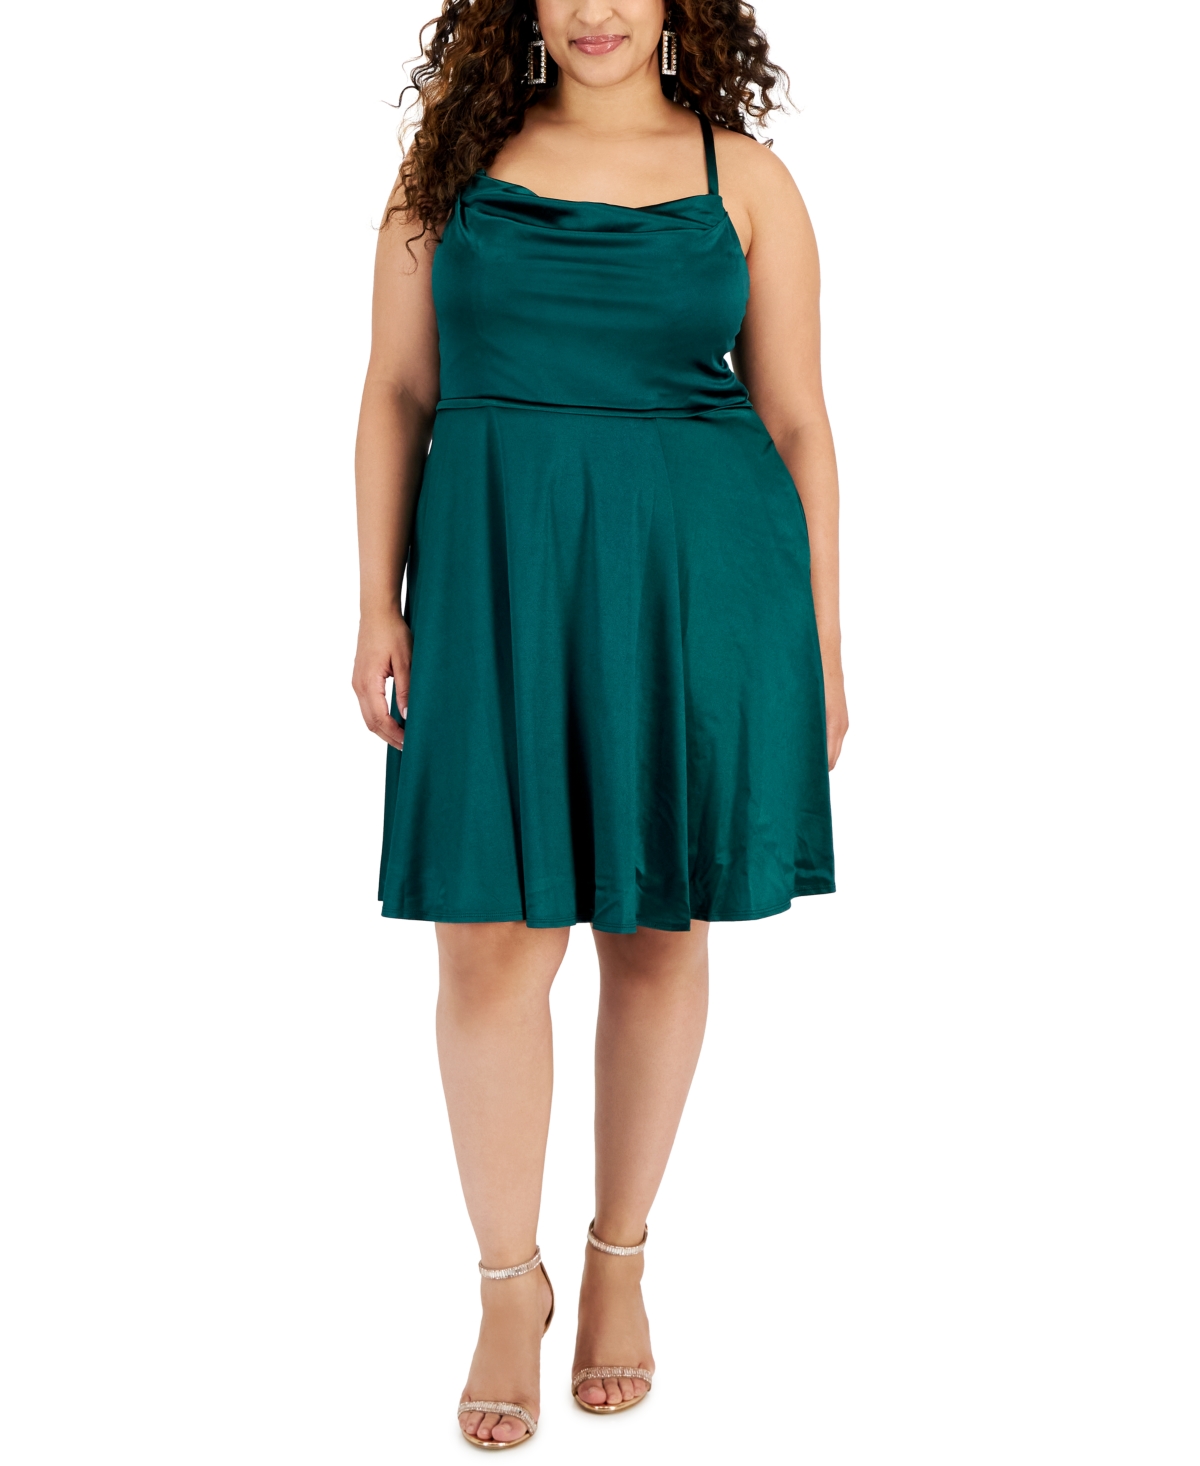 Emerald Sundae Trendy Plus Size Cowl Neck Fit & Flare Dress In Spruce Green